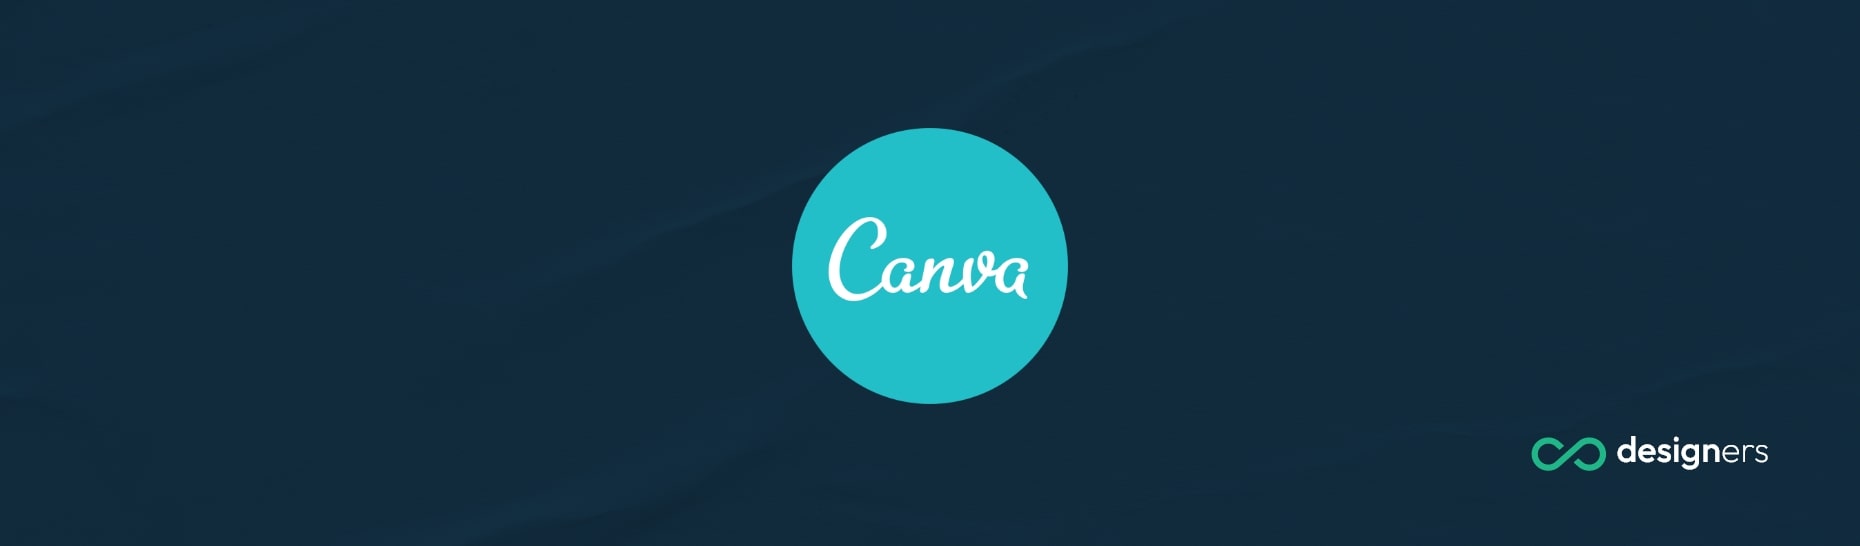 When Was Canva Founded?